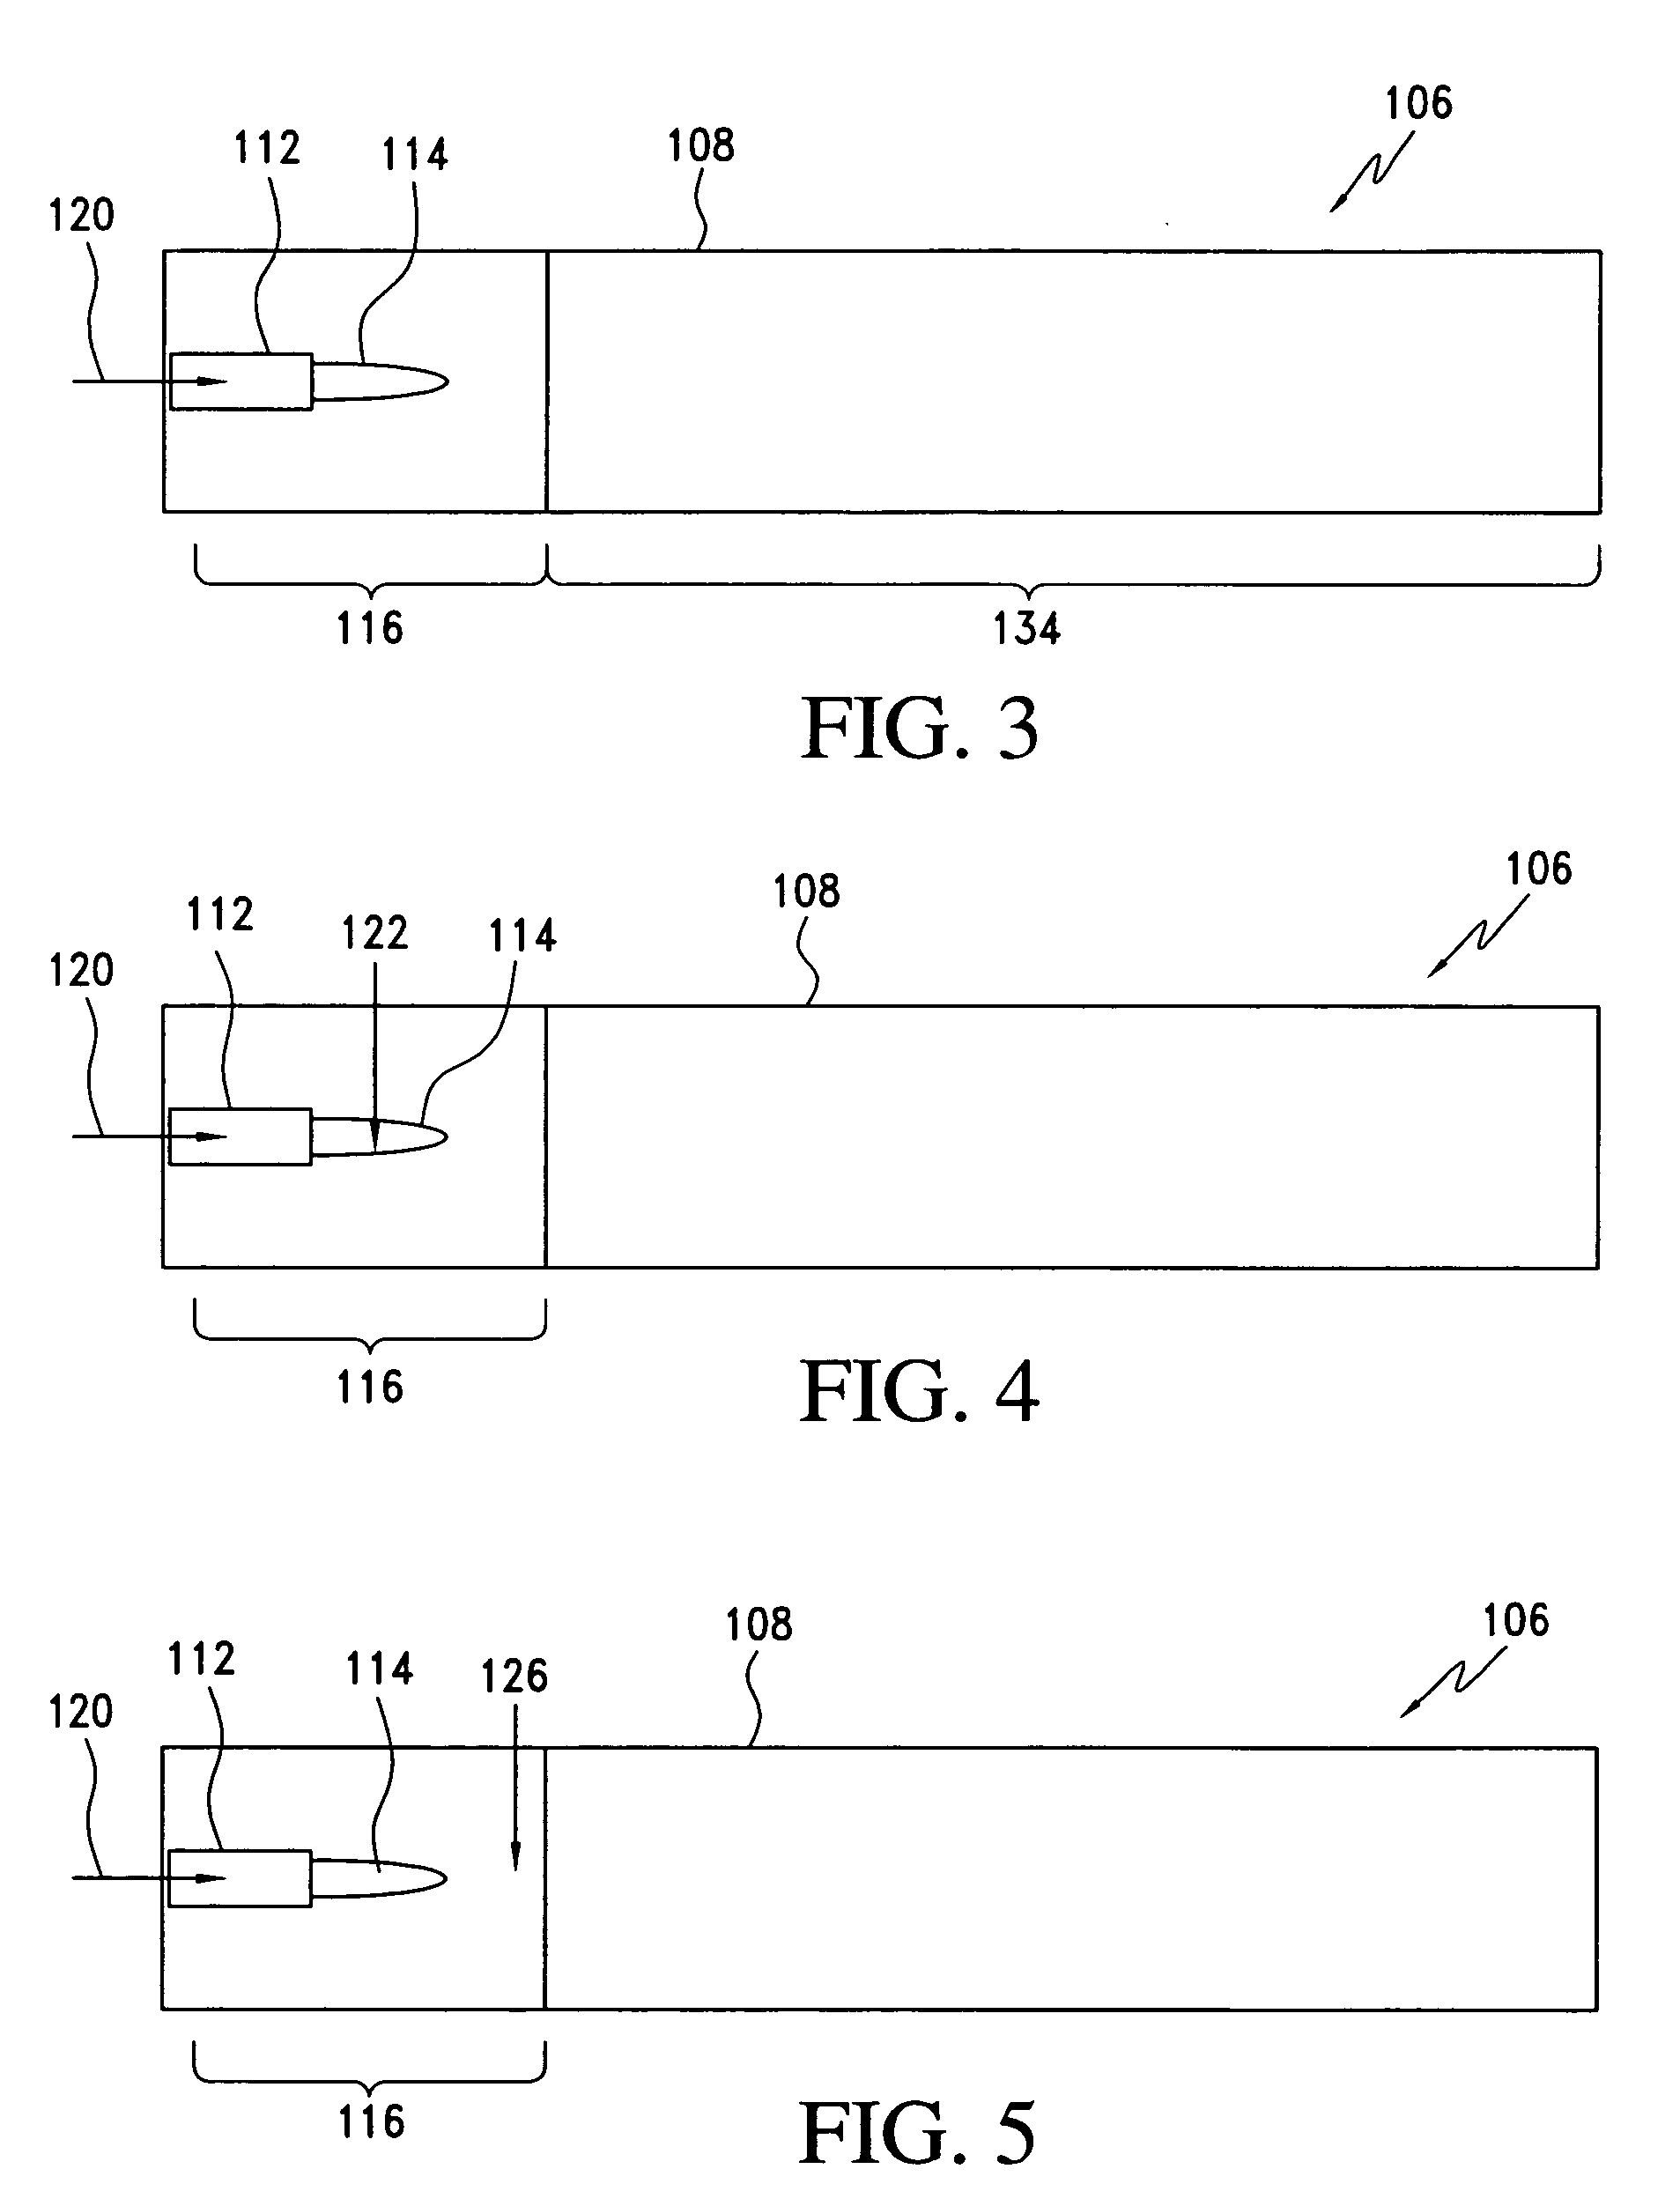 Controlling flame temperature in a flame spray reaction process